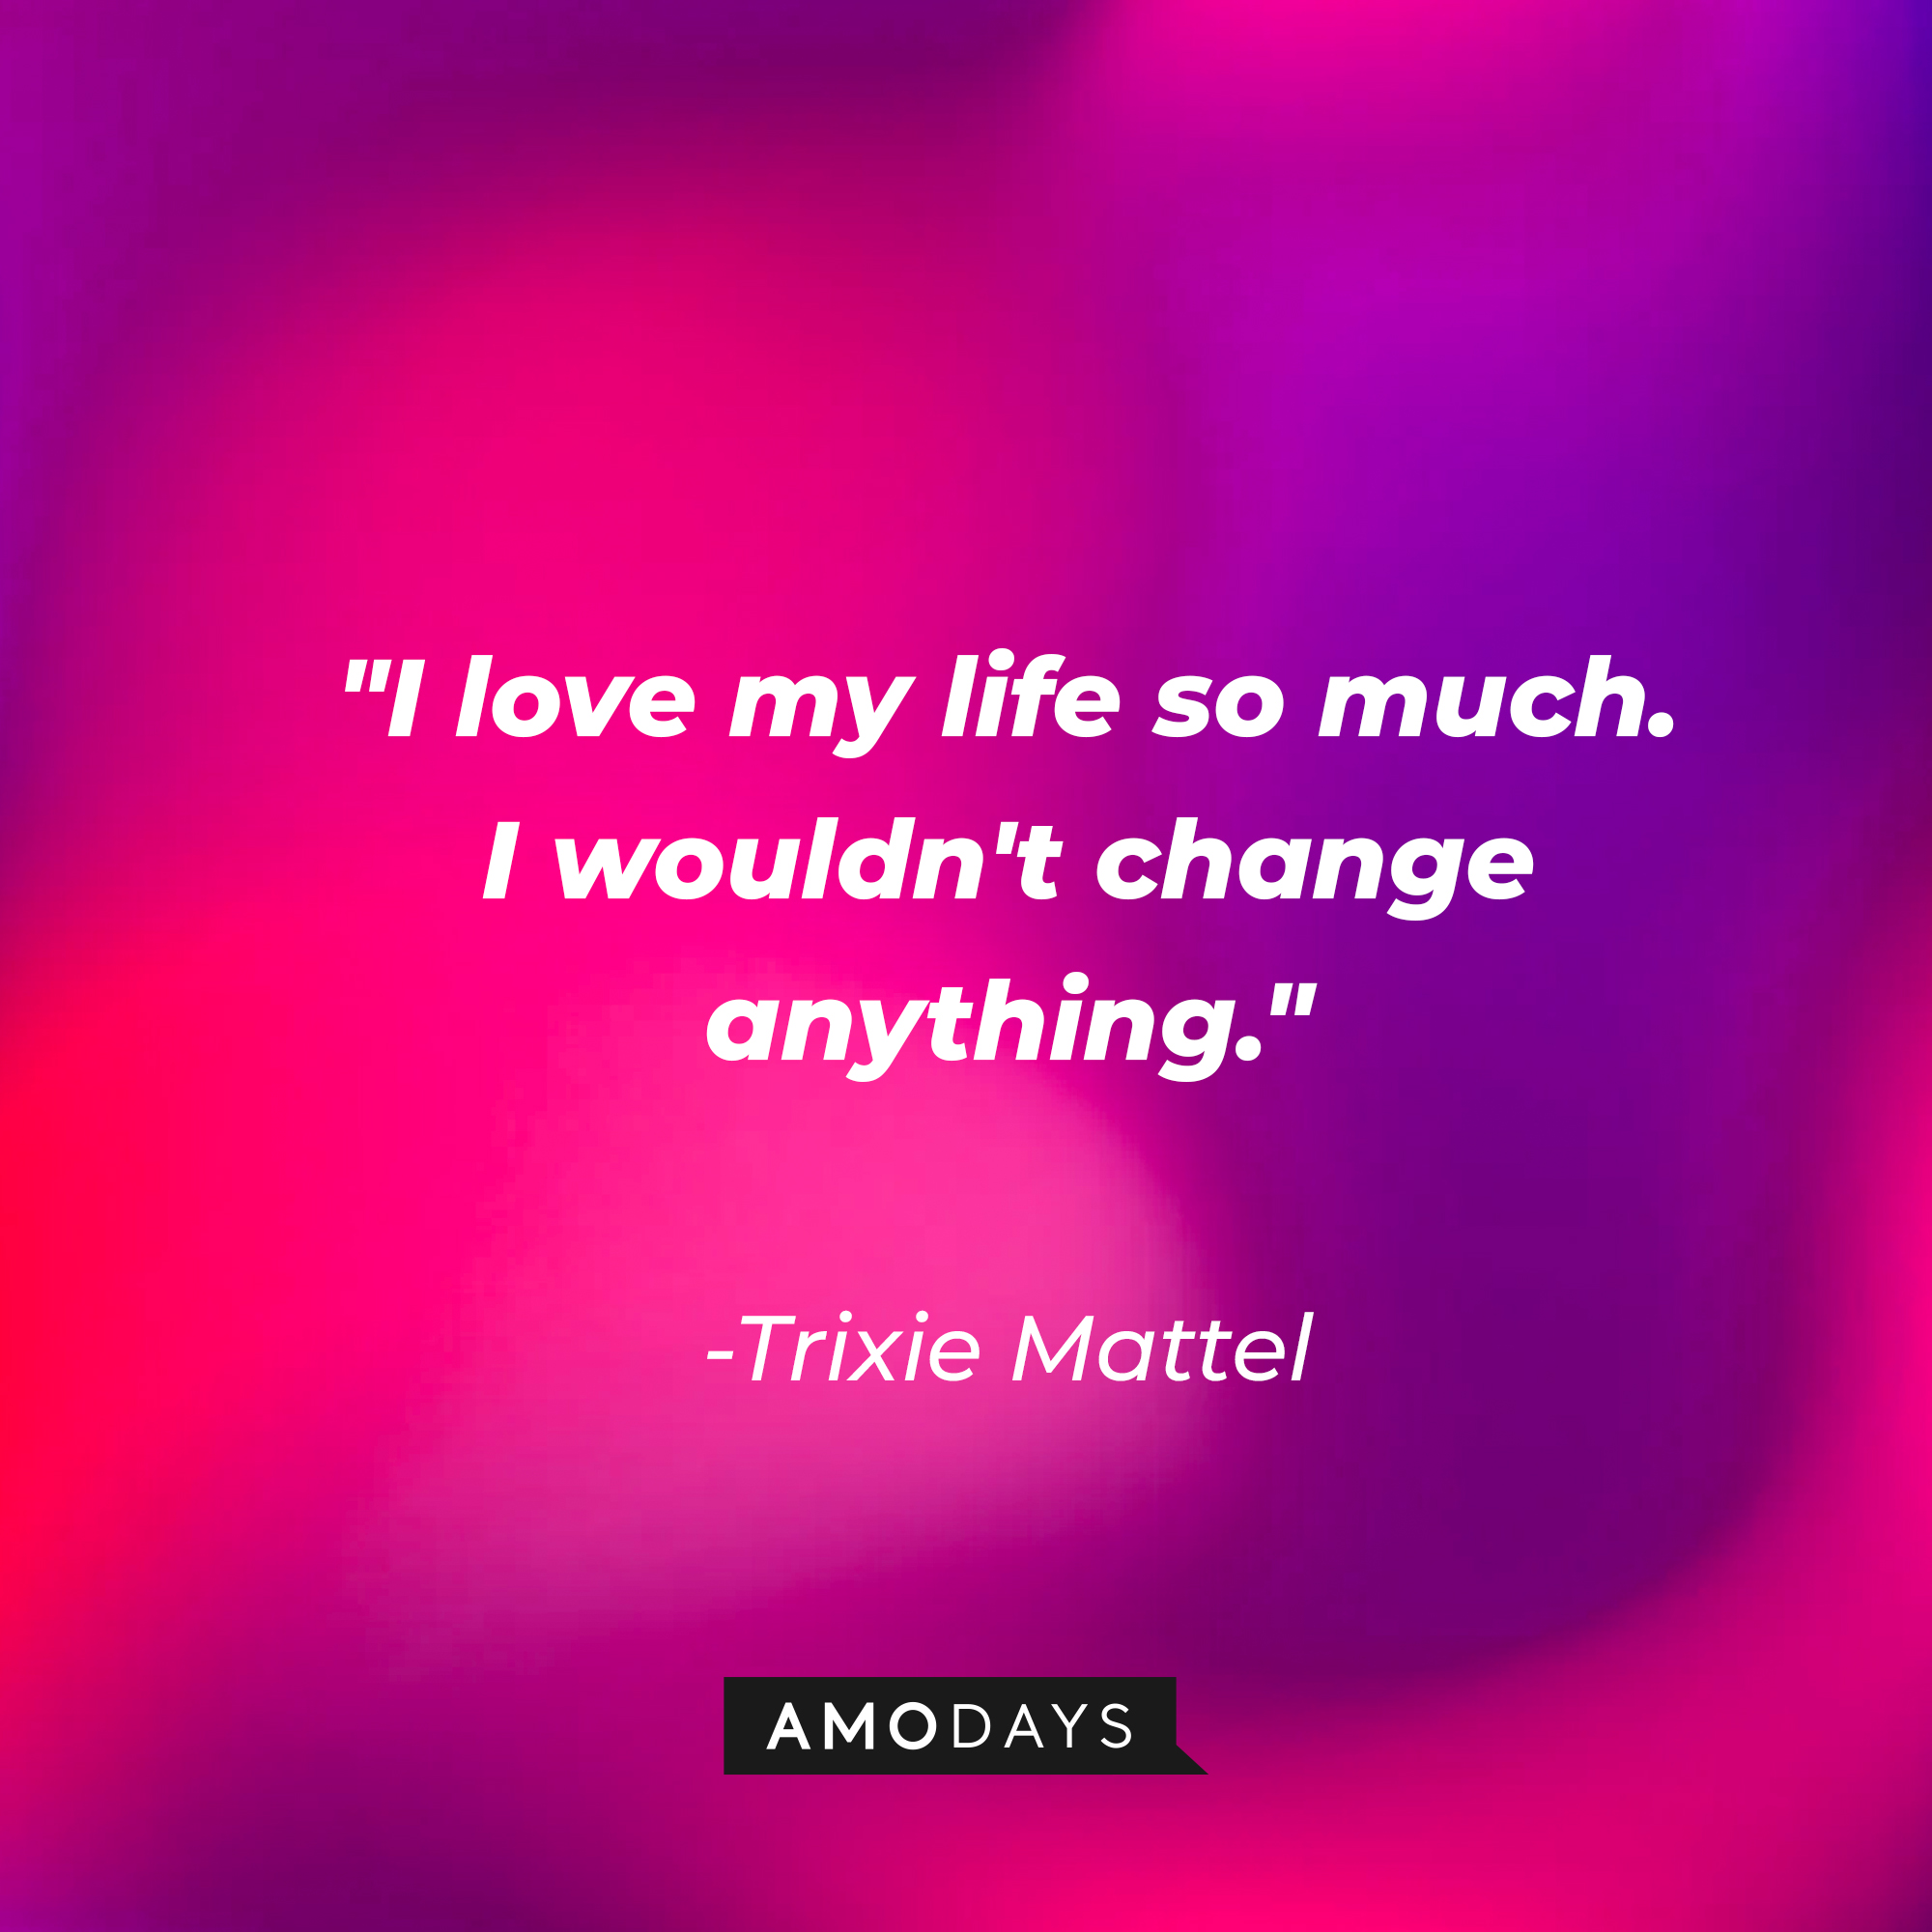 Trixie Mattel's quote: "I love my life so much. I wouldn't change anything." | Source: AmoDays